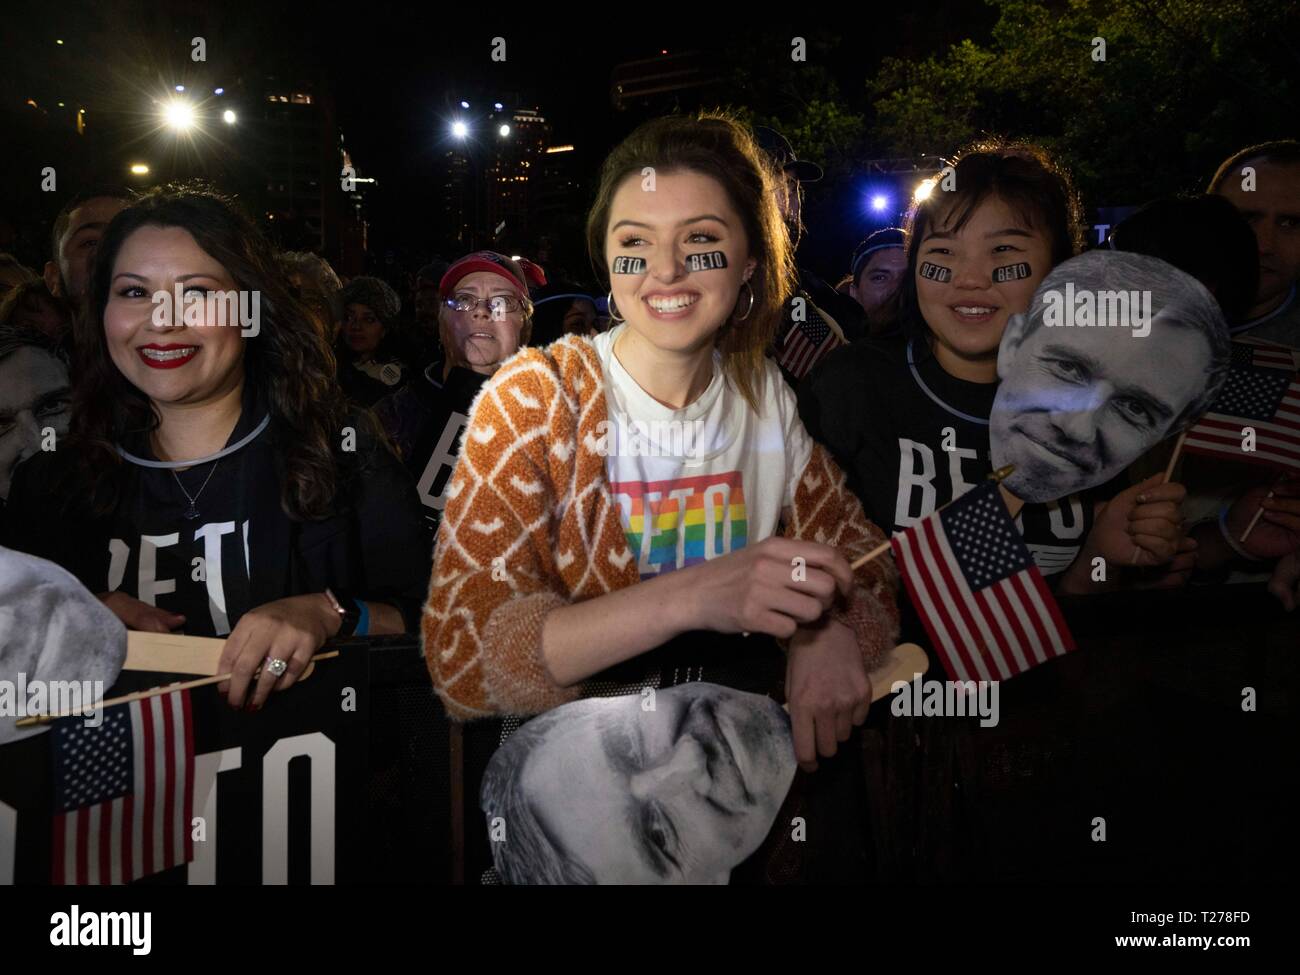 Young supporter wearing Beto eye black sticker smiles as the former congressman Beto O'Rourke of El Paso, TX kicks off his presidential campaign at a late night rally in front of the Texas Capitol. Stock Photo